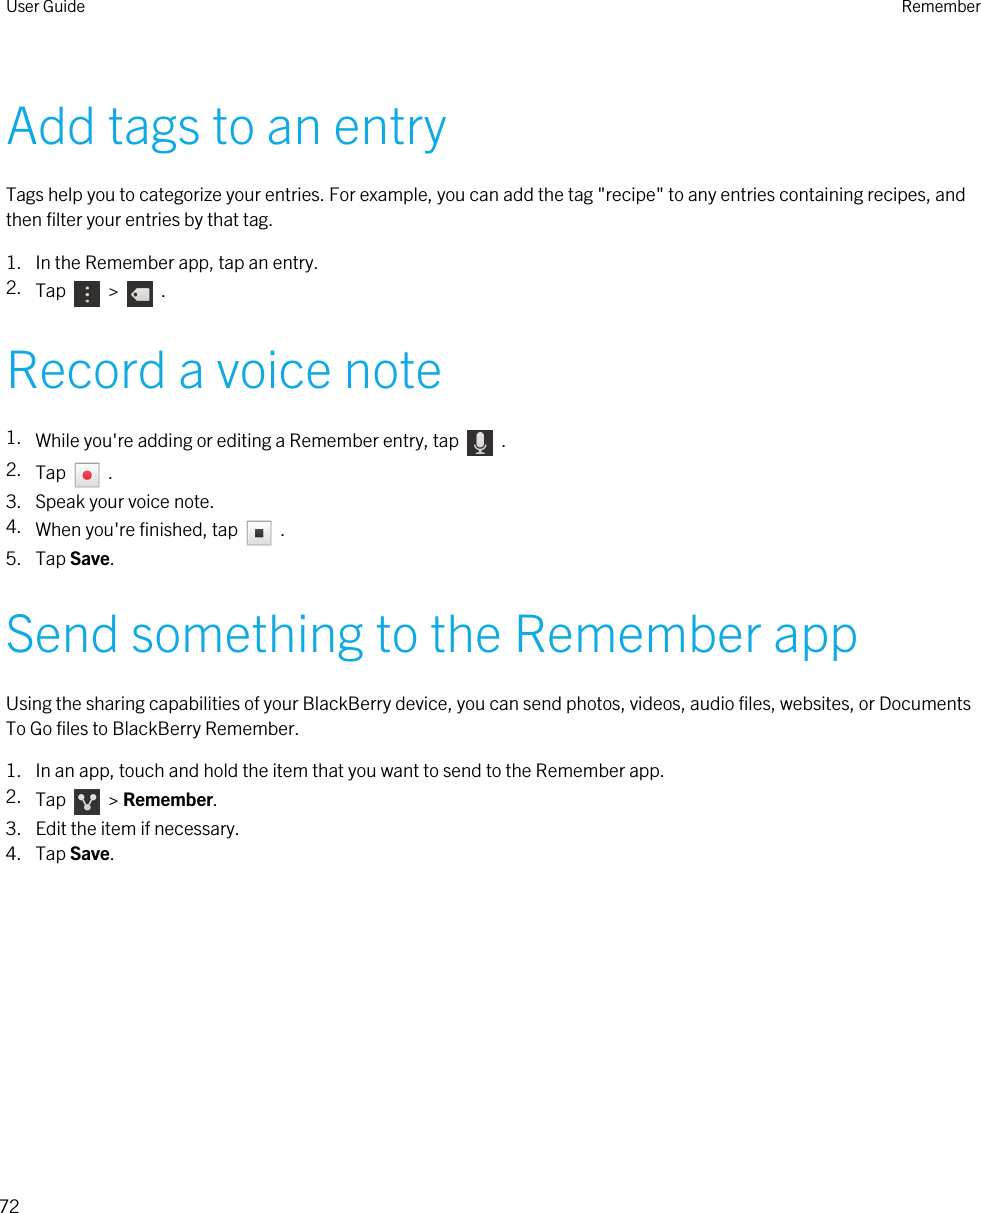 Add tags to an entryTags help you to categorize your entries. For example, you can add the tag &quot;recipe&quot; to any entries containing recipes, and then filter your entries by that tag.1. In the Remember app, tap an entry.2. Tap    &gt;    .Record a voice note1. While you&apos;re adding or editing a Remember entry, tap    .2. Tap    .3. Speak your voice note.4. When you&apos;re finished, tap    .5. Tap Save.Send something to the Remember appUsing the sharing capabilities of your BlackBerry device, you can send photos, videos, audio files, websites, or Documents To Go files to BlackBerry Remember.1. In an app, touch and hold the item that you want to send to the Remember app.2. Tap    &gt; Remember.3. Edit the item if necessary.4. Tap Save.User Guide Remember72 